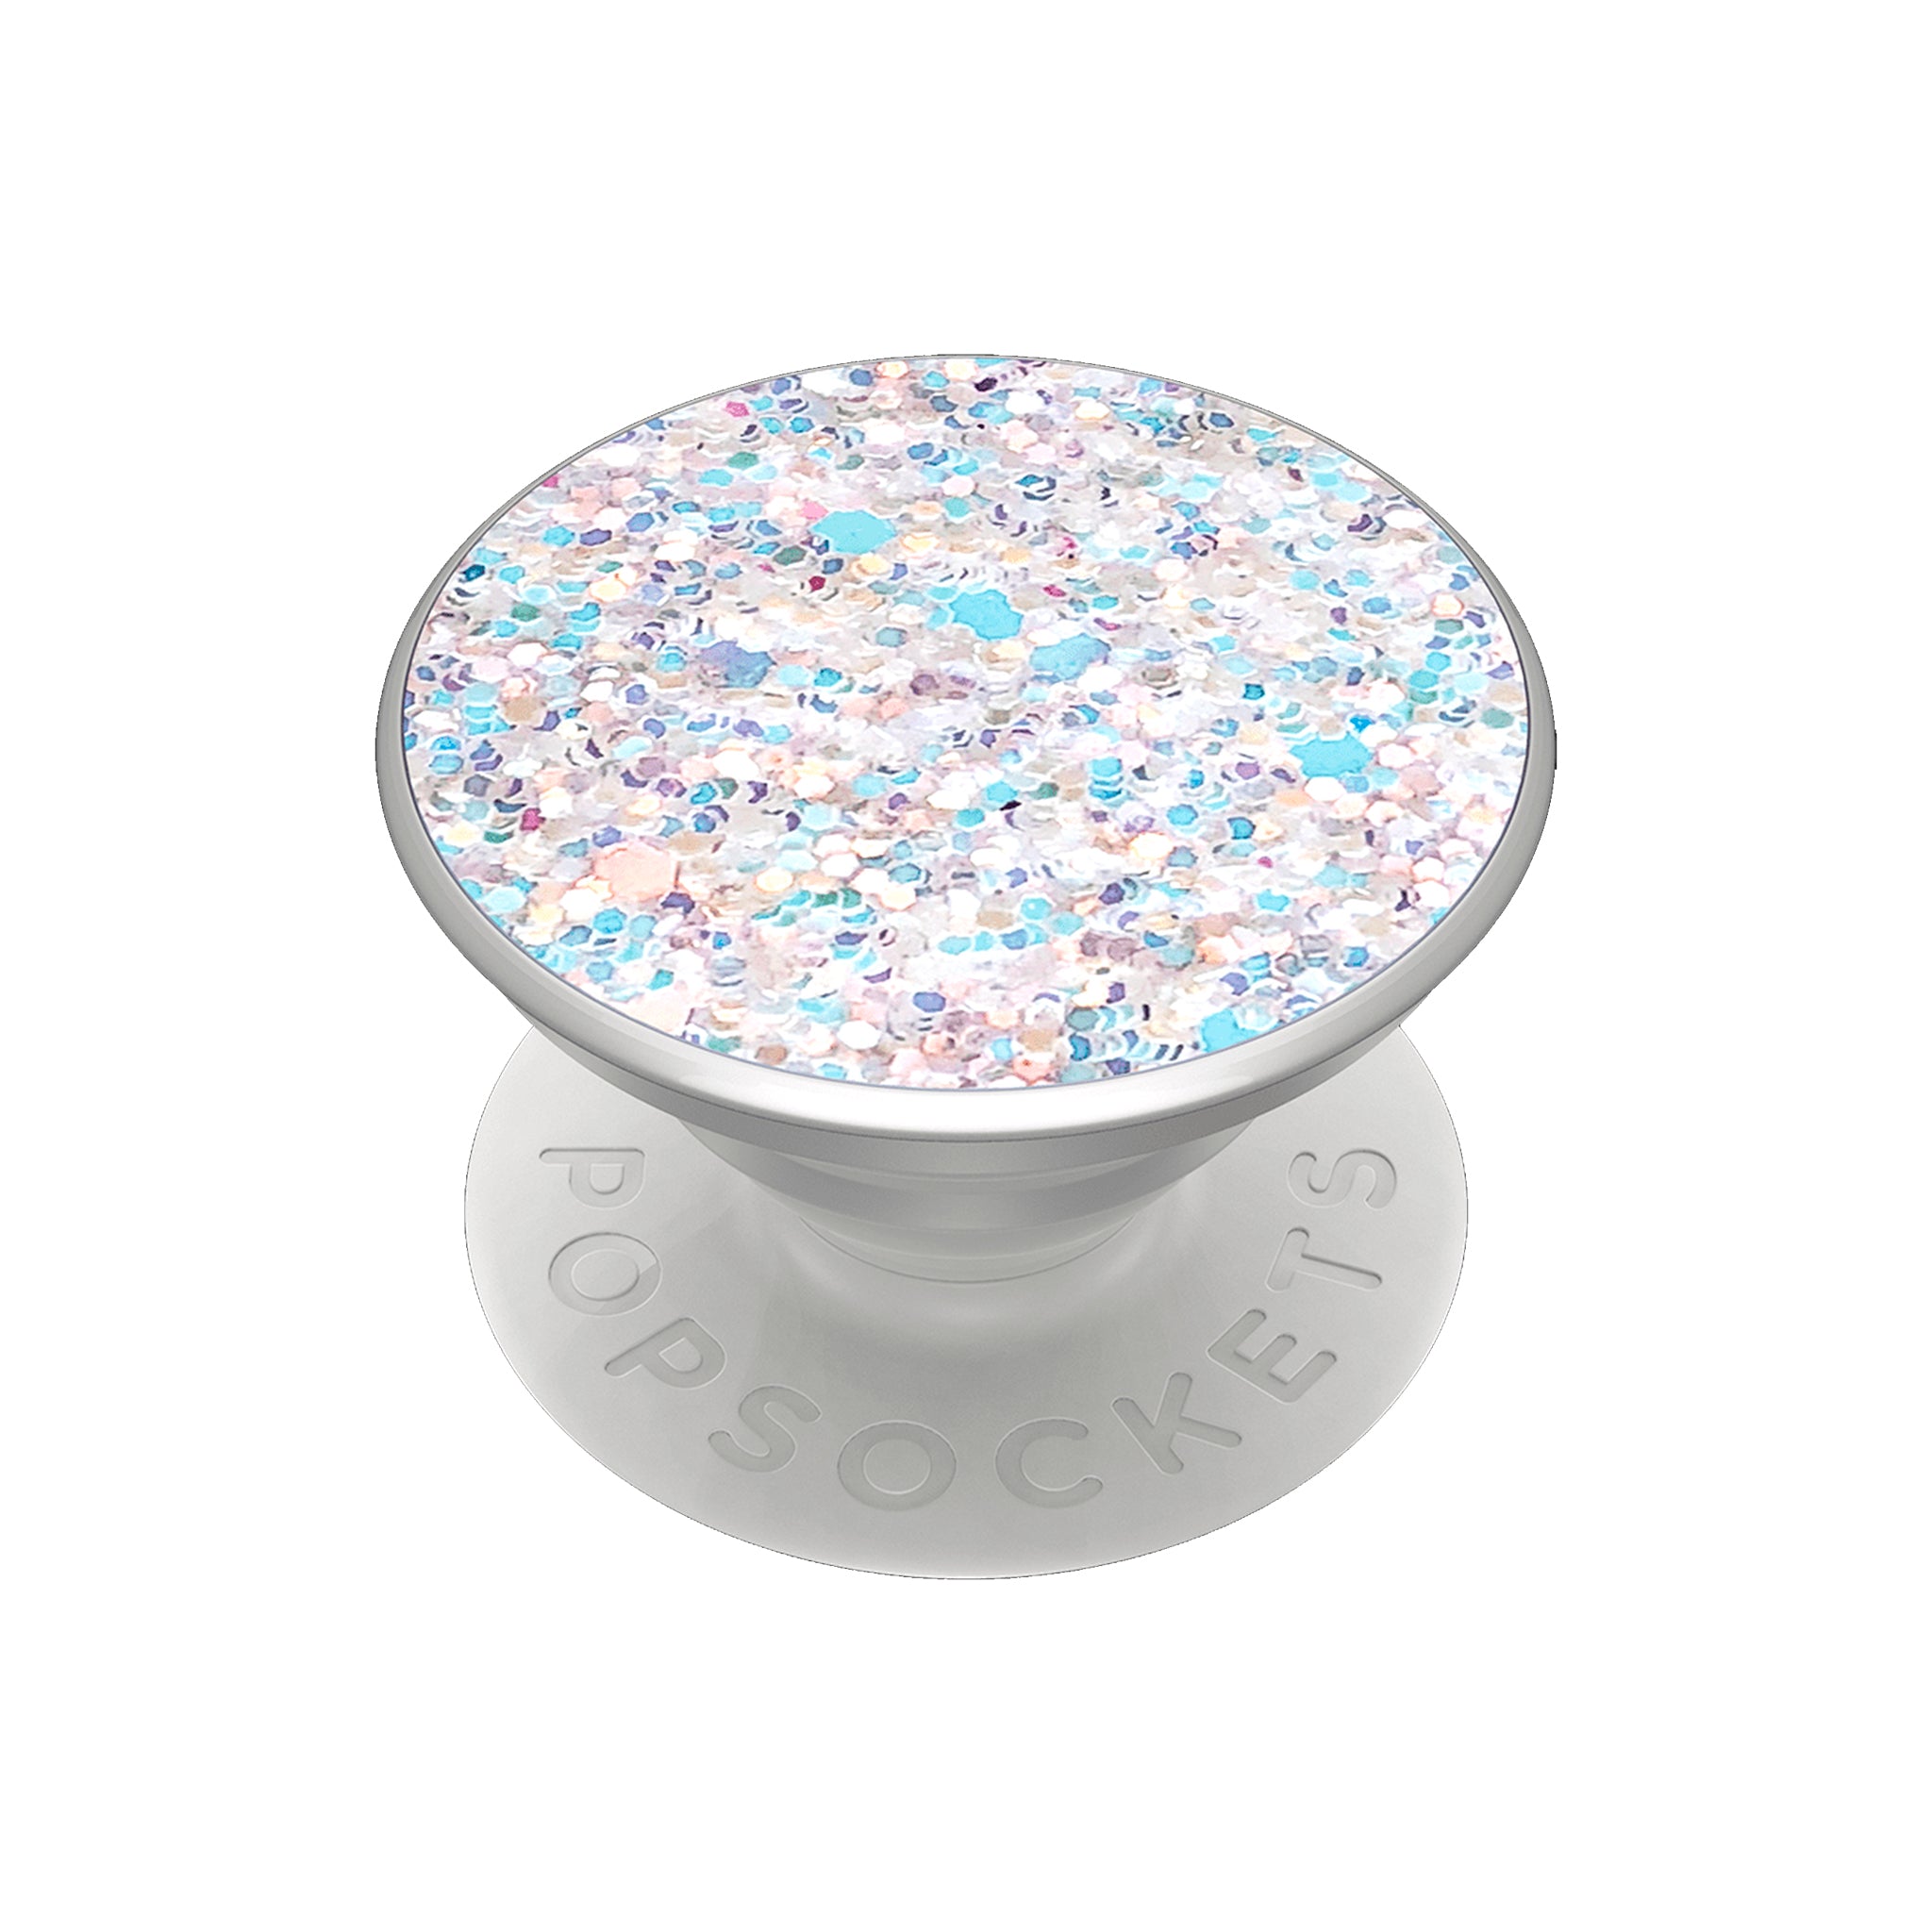 Popsockets - Popgrip Premium Swappable Device Stand And Grip - Sparkle Snow White